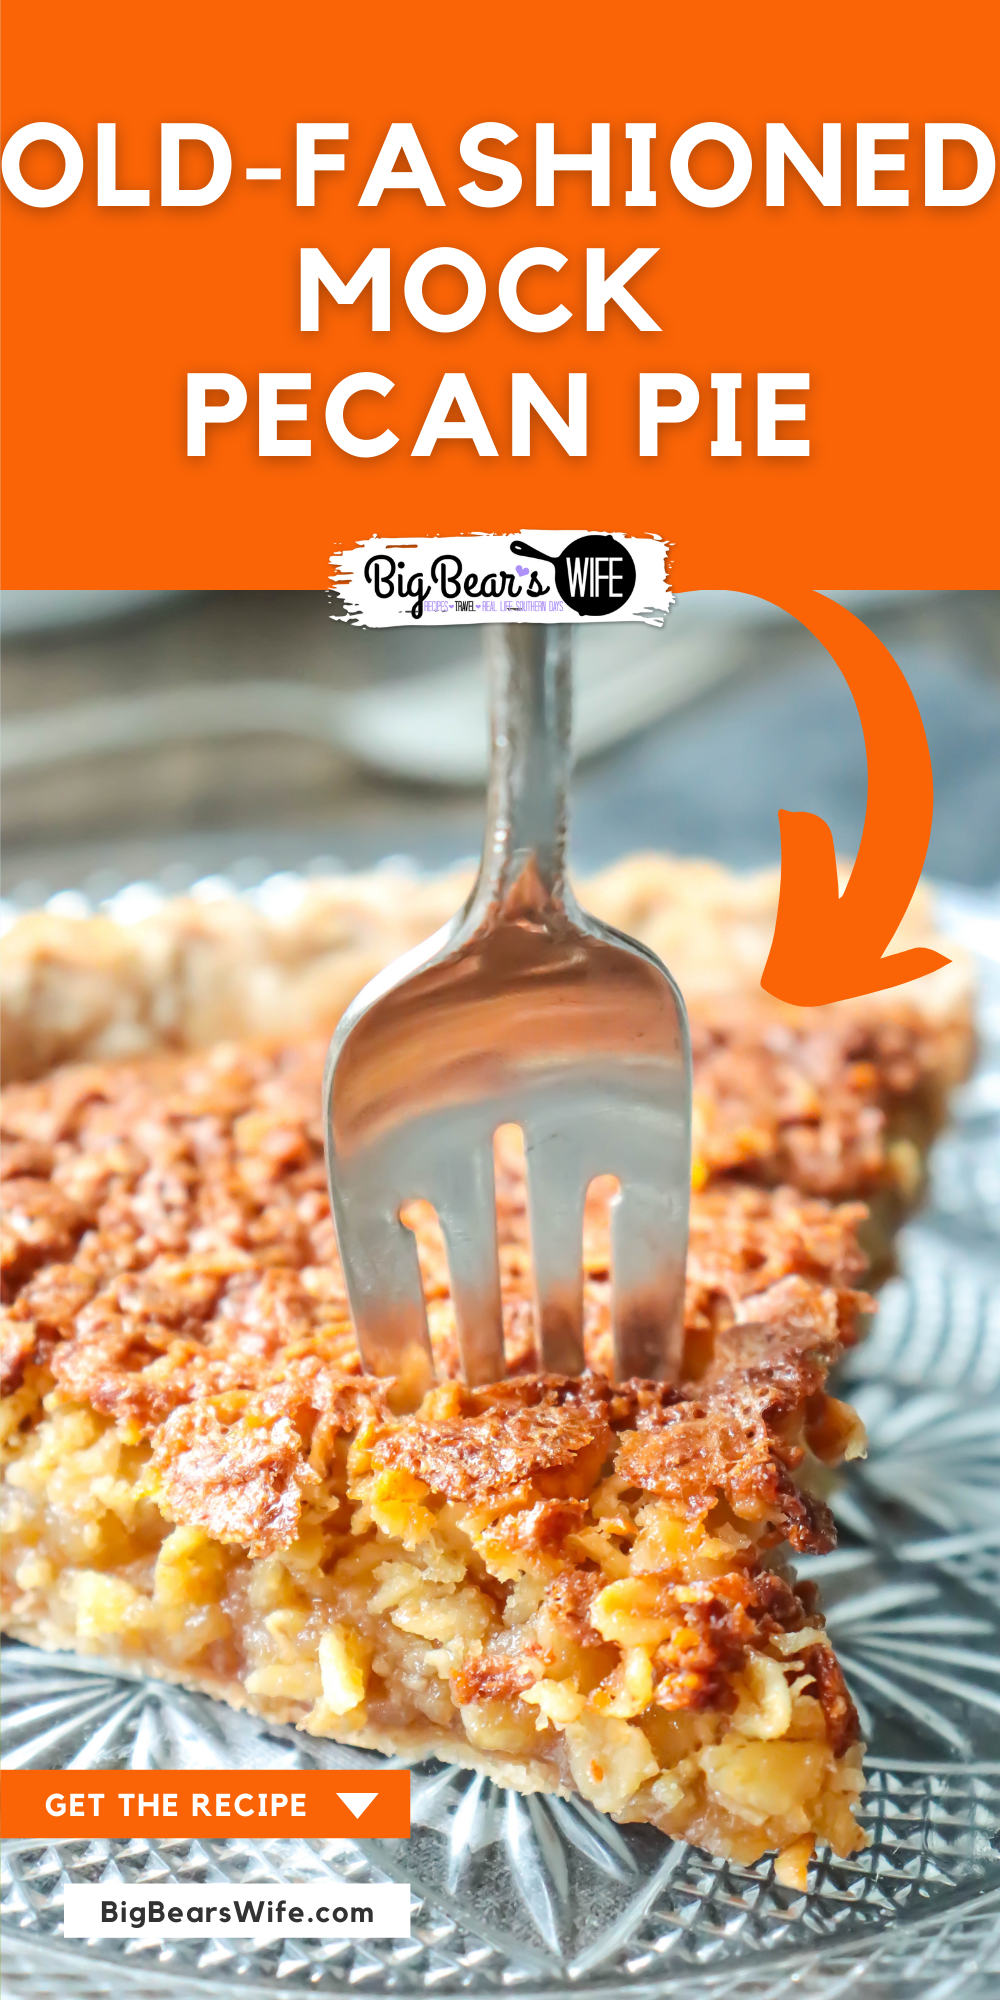 Old-Fashioned Mock Pecan Pie is a vintage pie recipe that is also know as "Depression Pie" or "Oatmeal Pie" and it was popular in the 1920s and 1930s during the depression.  via @bigbearswife